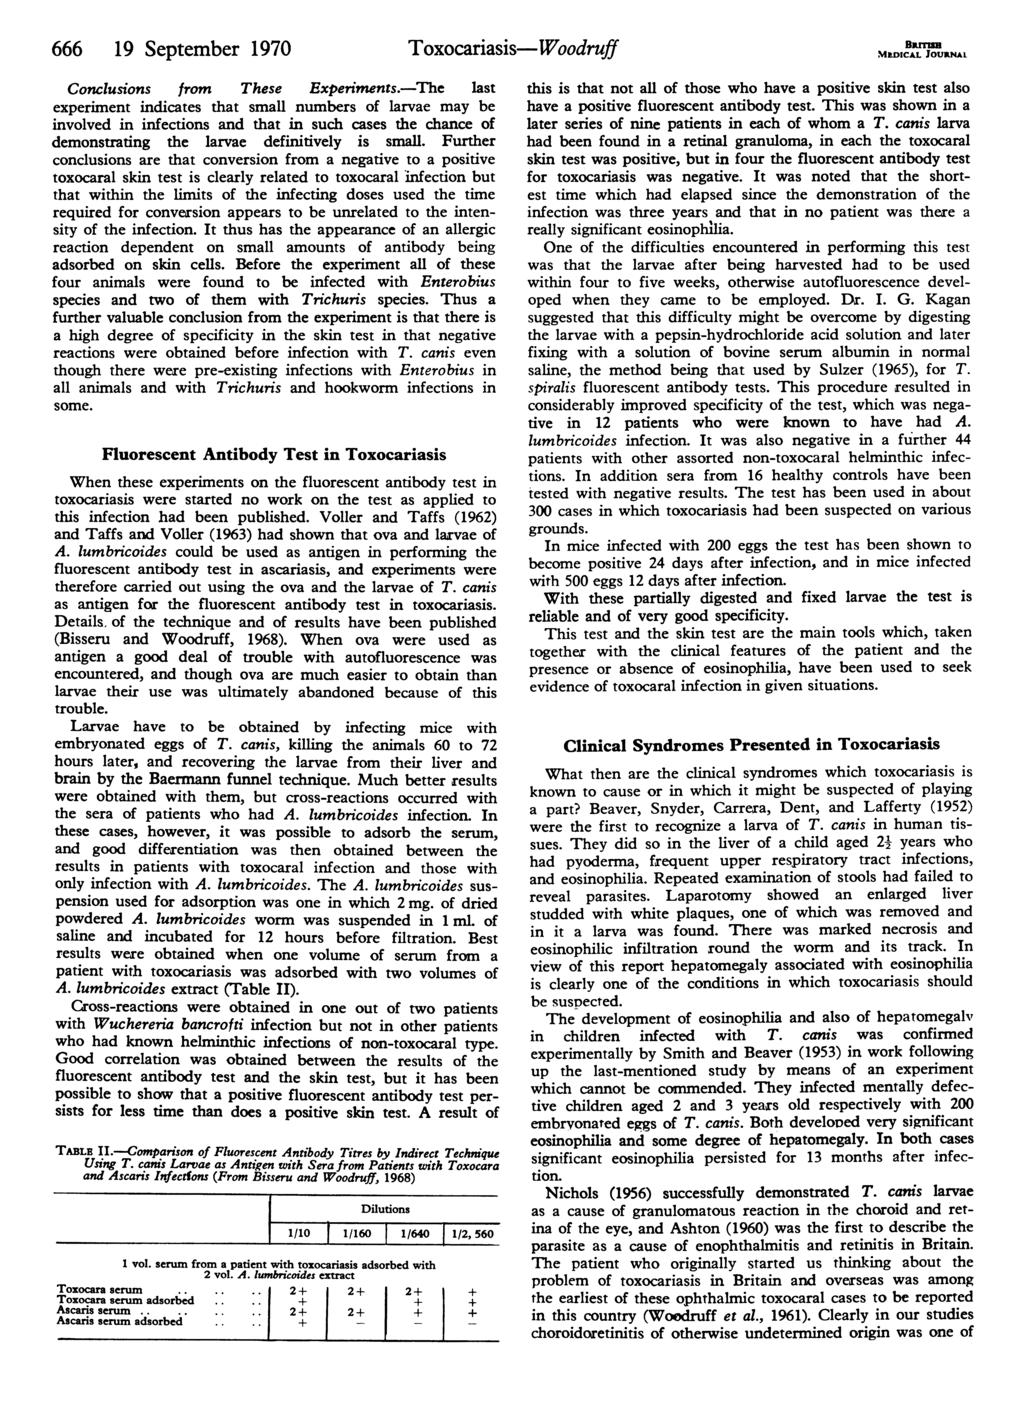 666 19 September 1970 Toxocariasis-Woodruff Conclusions from These Experiments.